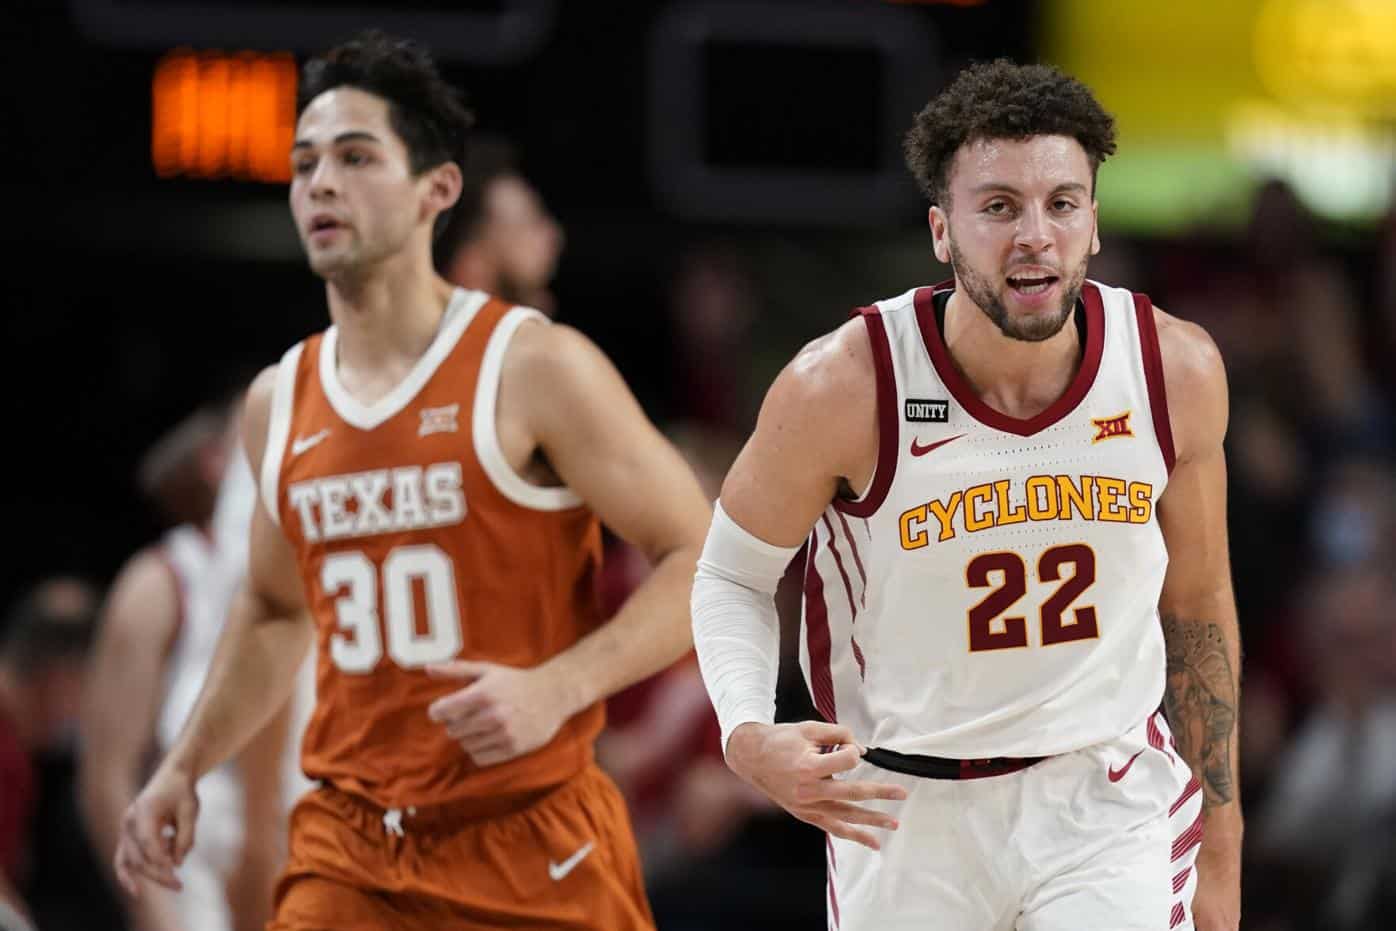 February 5th Iowa State at Texas betting